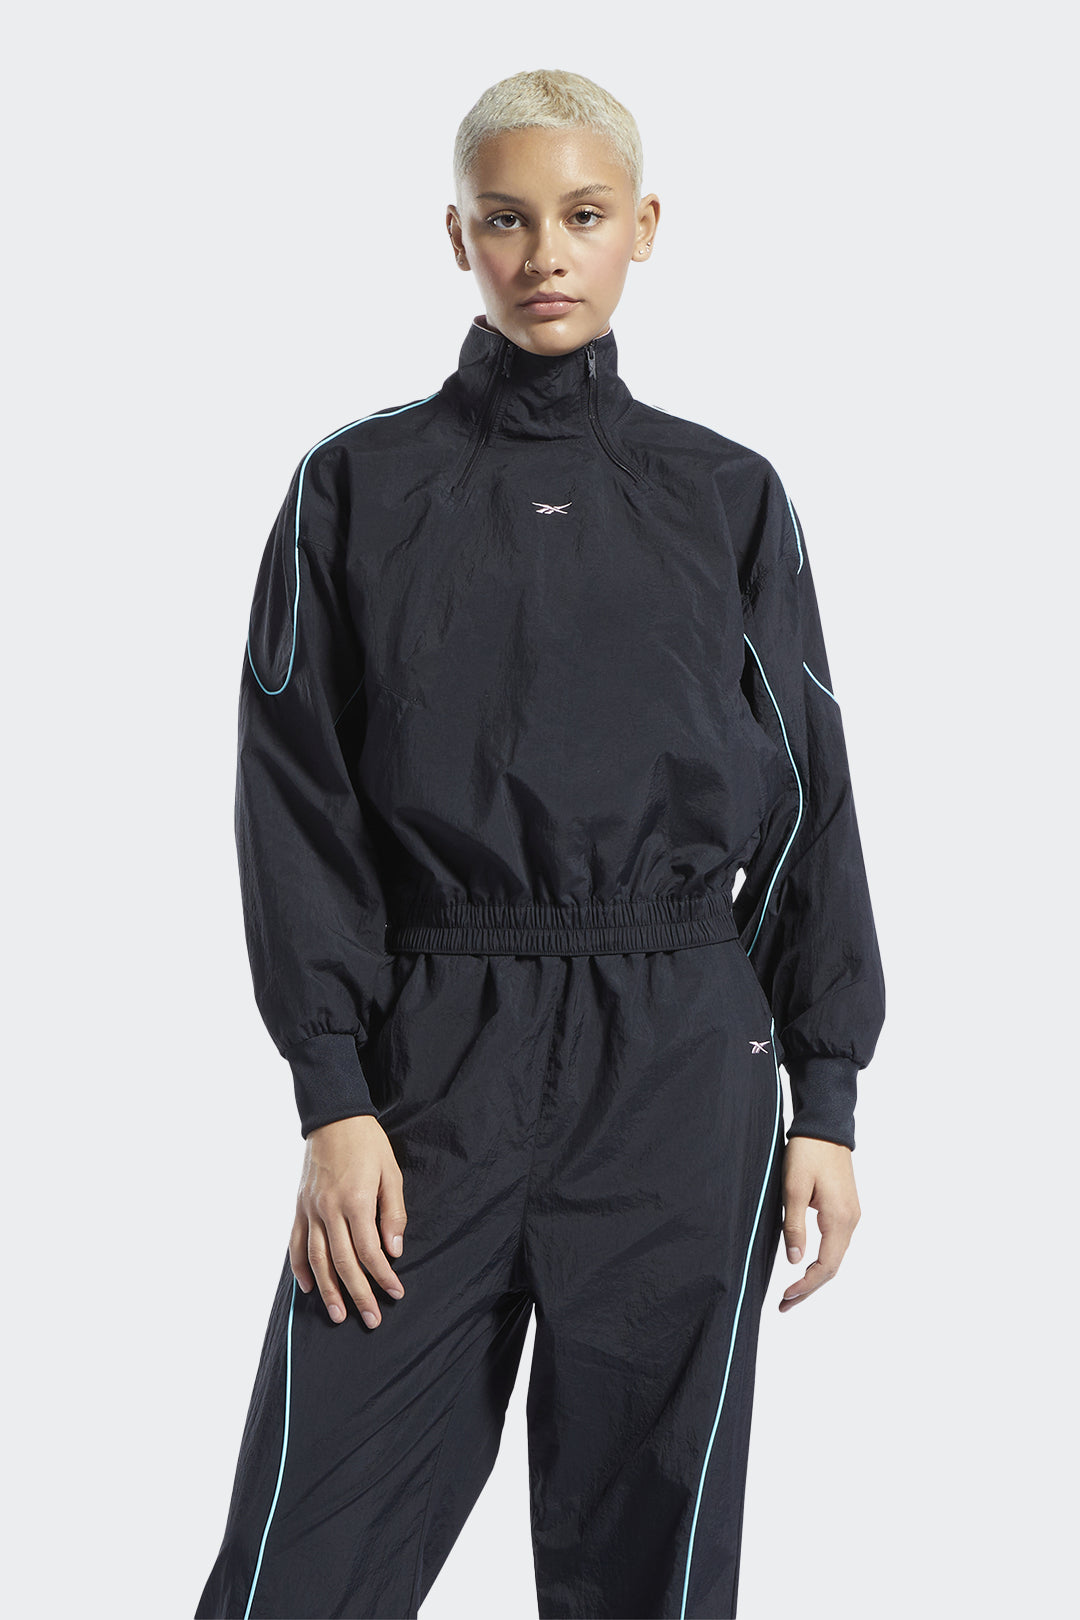 REEBOK CHAQUETA HERITAGE COVERUP - MUJER - HYPE